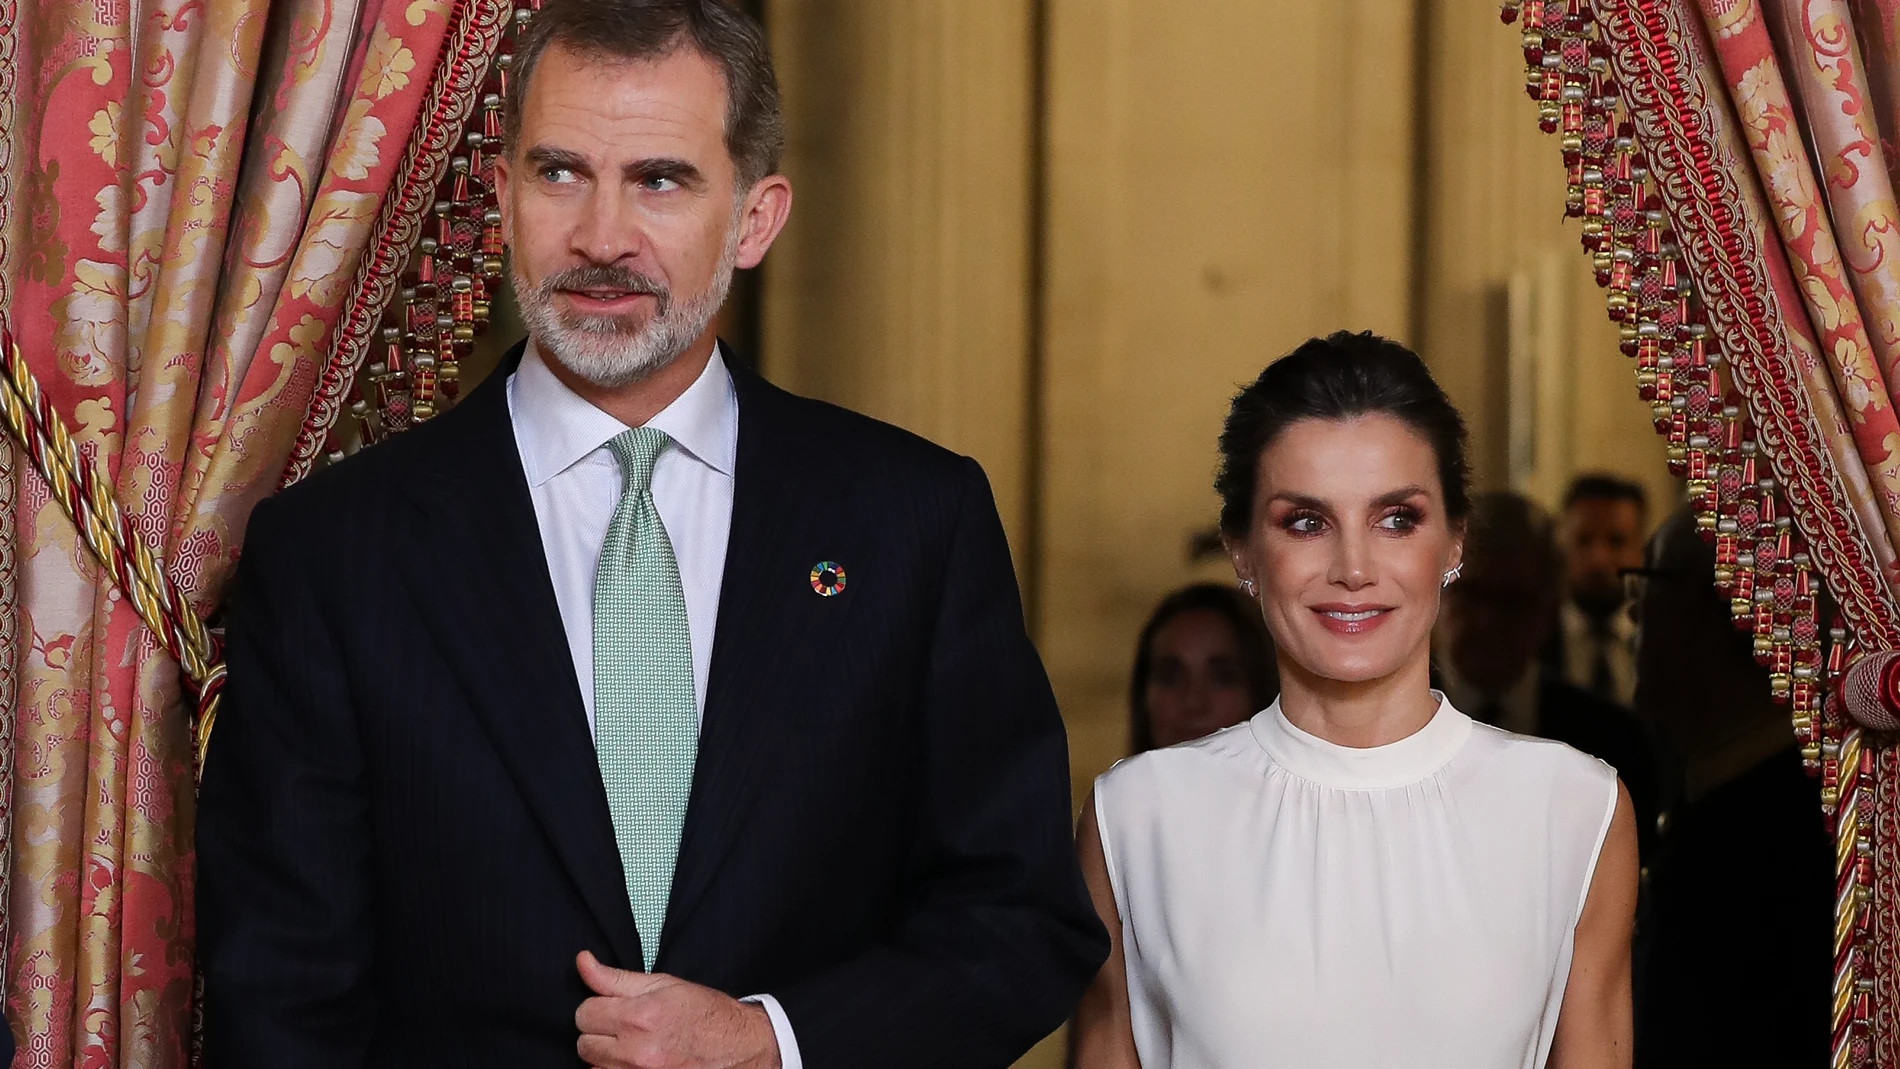 Spanish Kings Felipe VI and Letizia Ortiz during ceremonial reception for COP25 UN Climate Change participants at ZarzuelaPalace in Madrid on Monday, 02 December 2019.